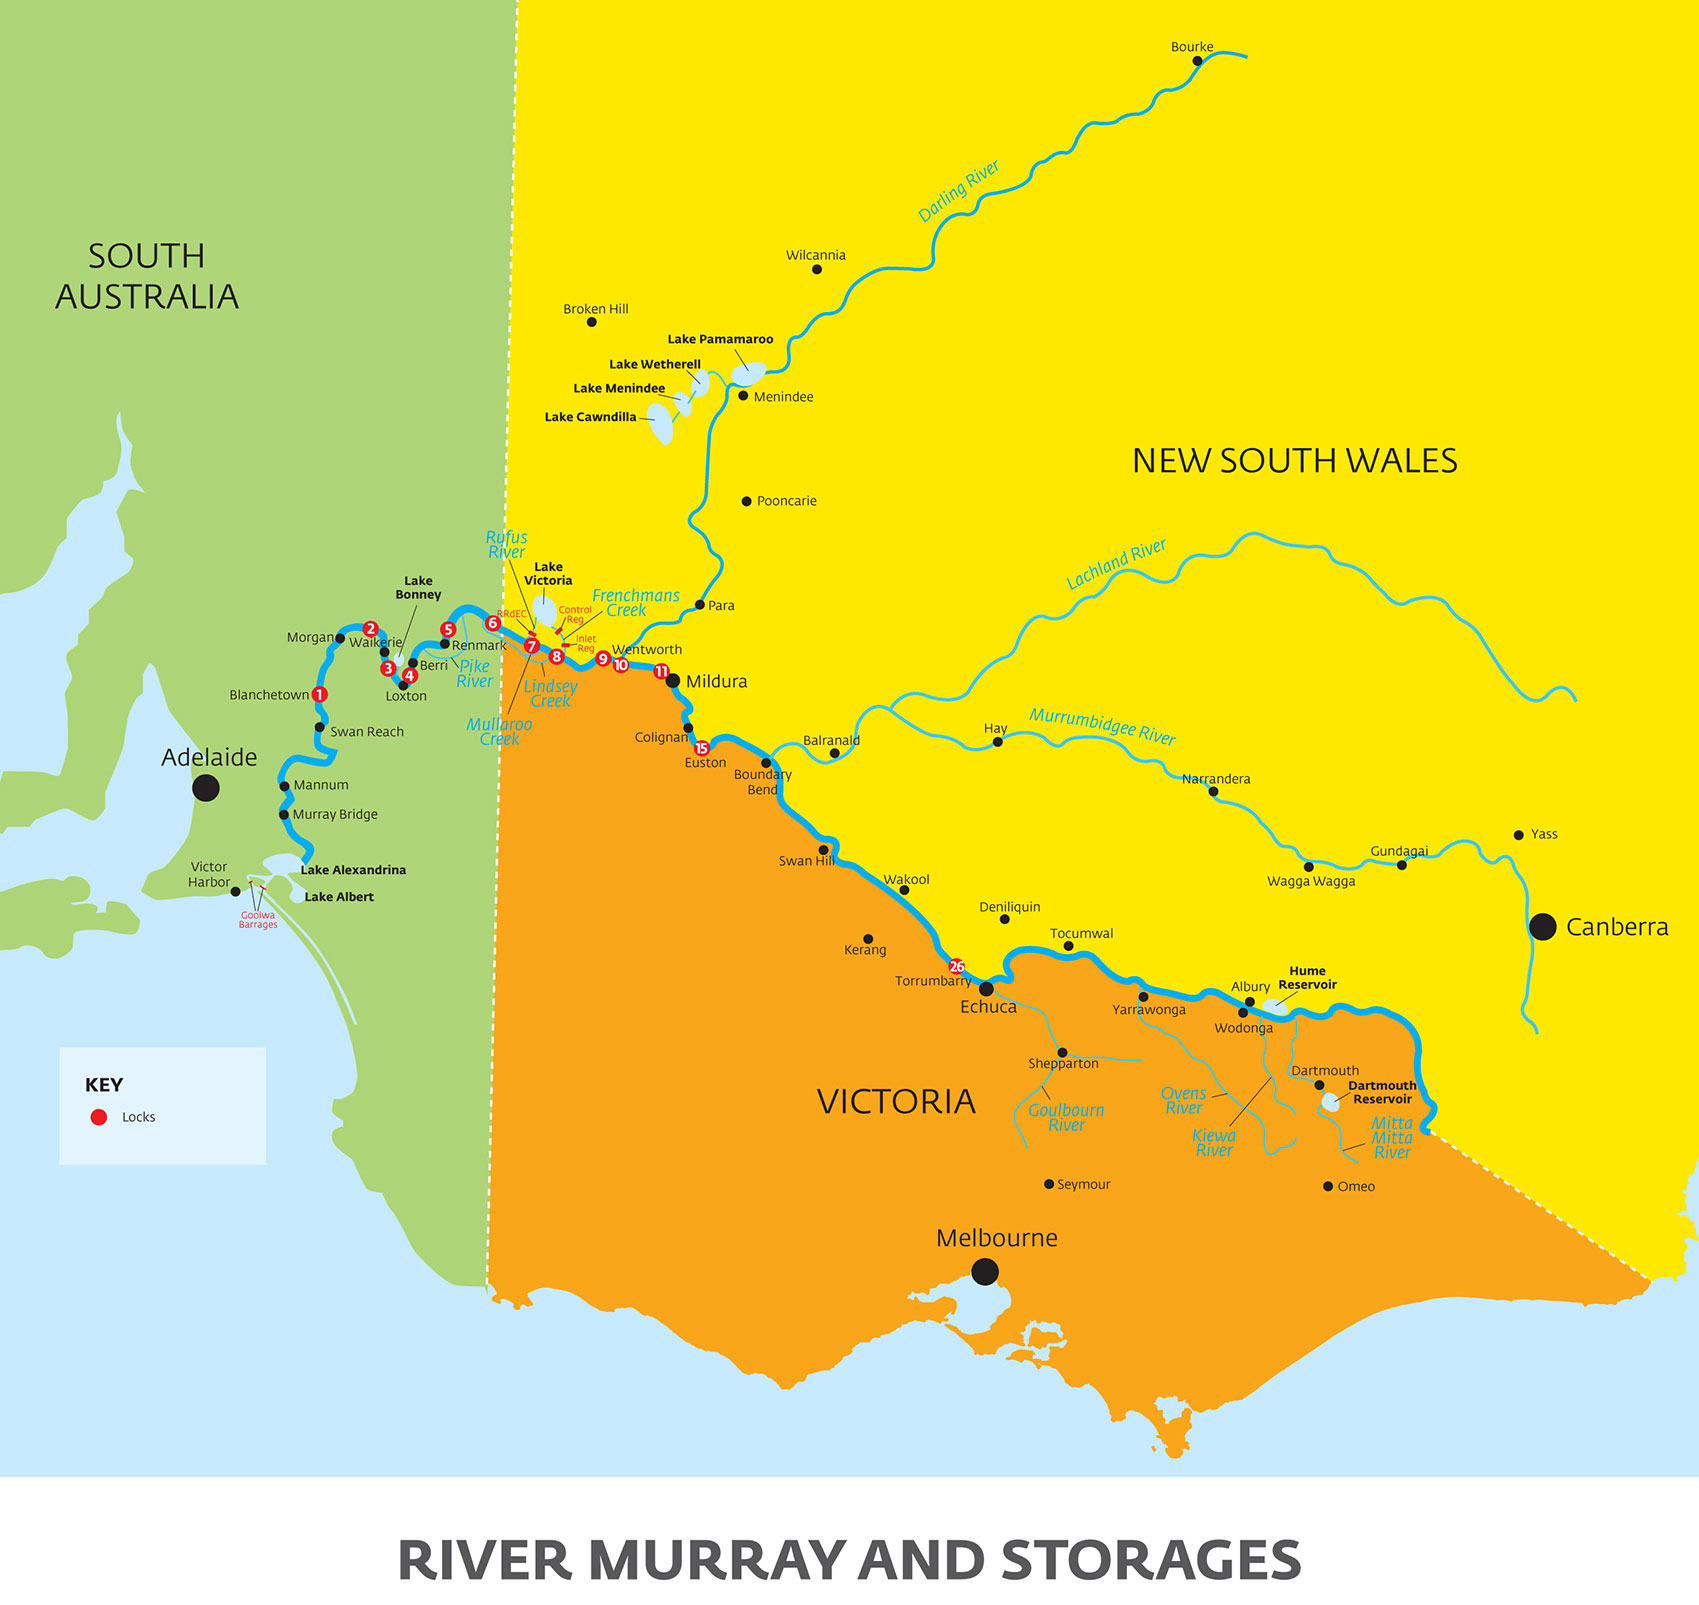 The River Murray and Storage system, including numbered locks.